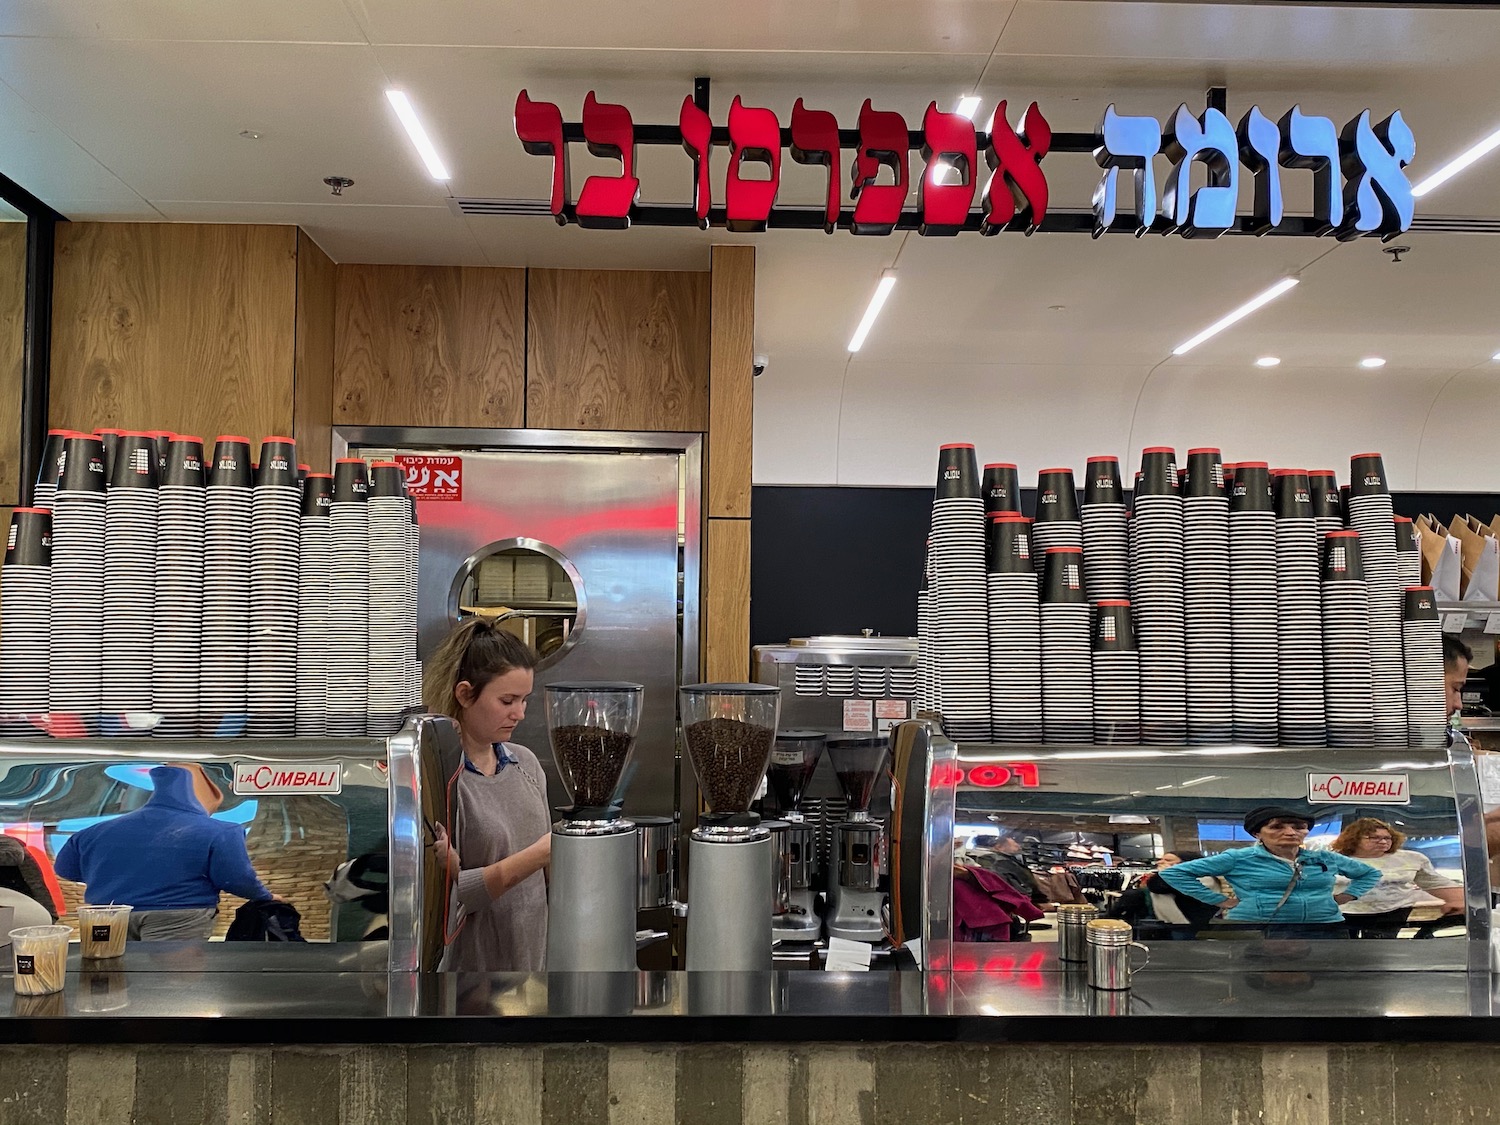 a woman behind a counter with a group of stacks of coffee cups